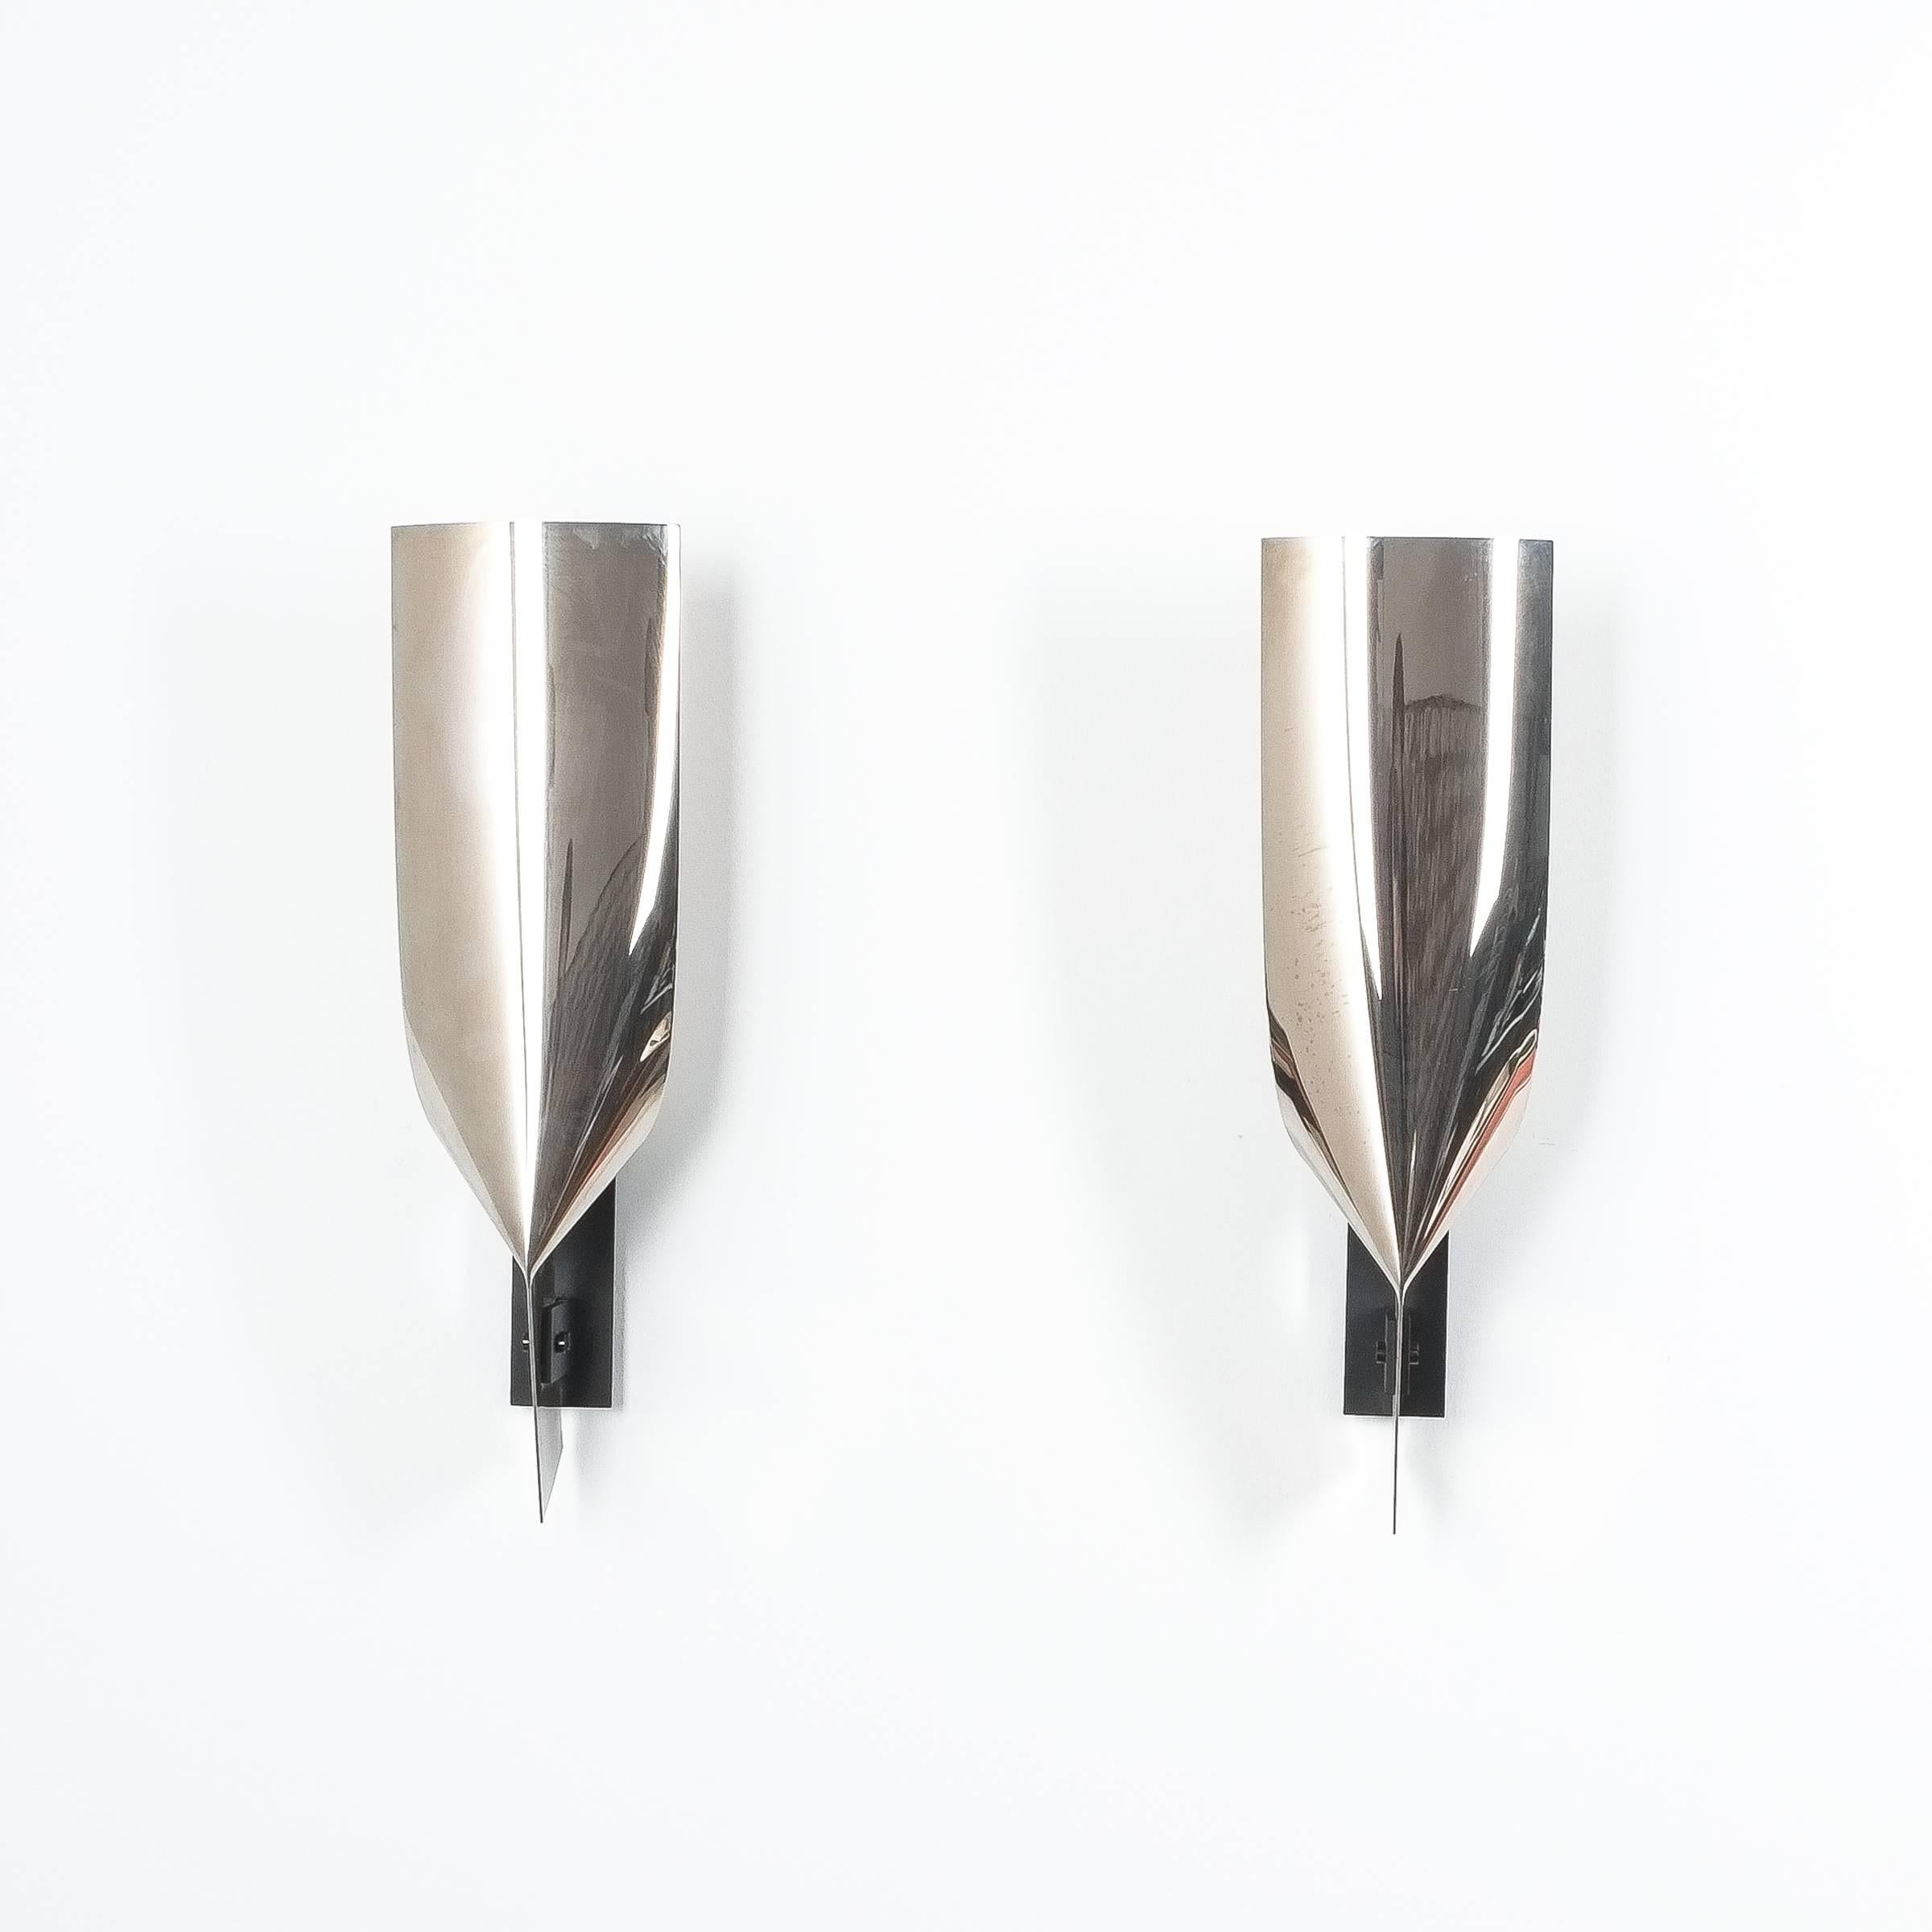 Polished artisan stainless steel wall lamps folded large sconces, France, 1980. Fantastic one-of-a-kind 21